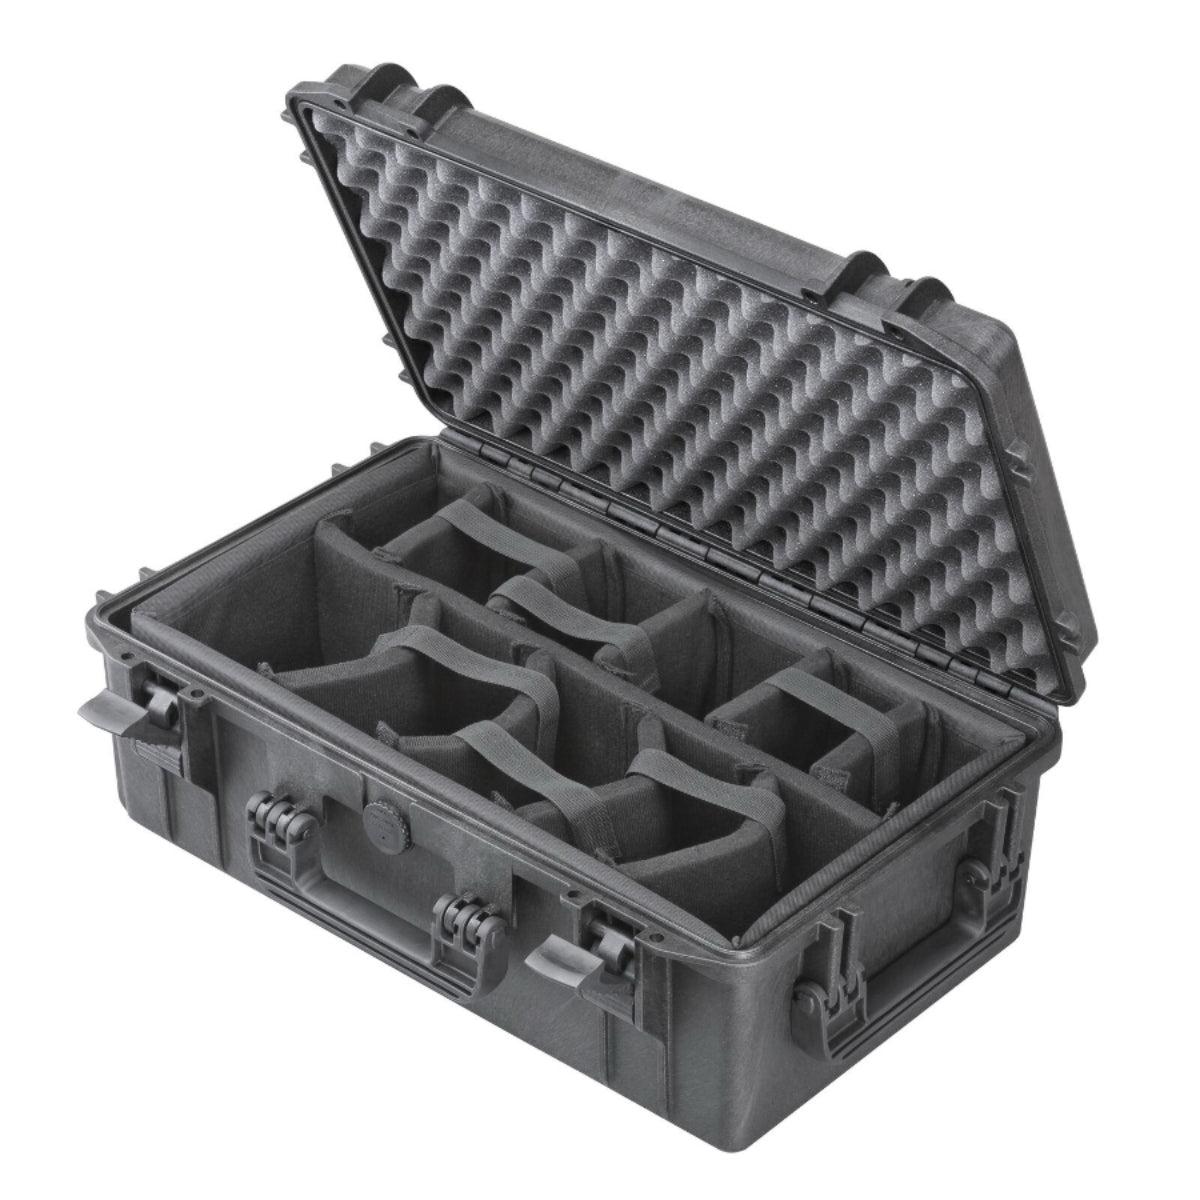 SP PRO 520CAM Black Carry Case, Padded Dividers, ID: L520xW290xH200mm